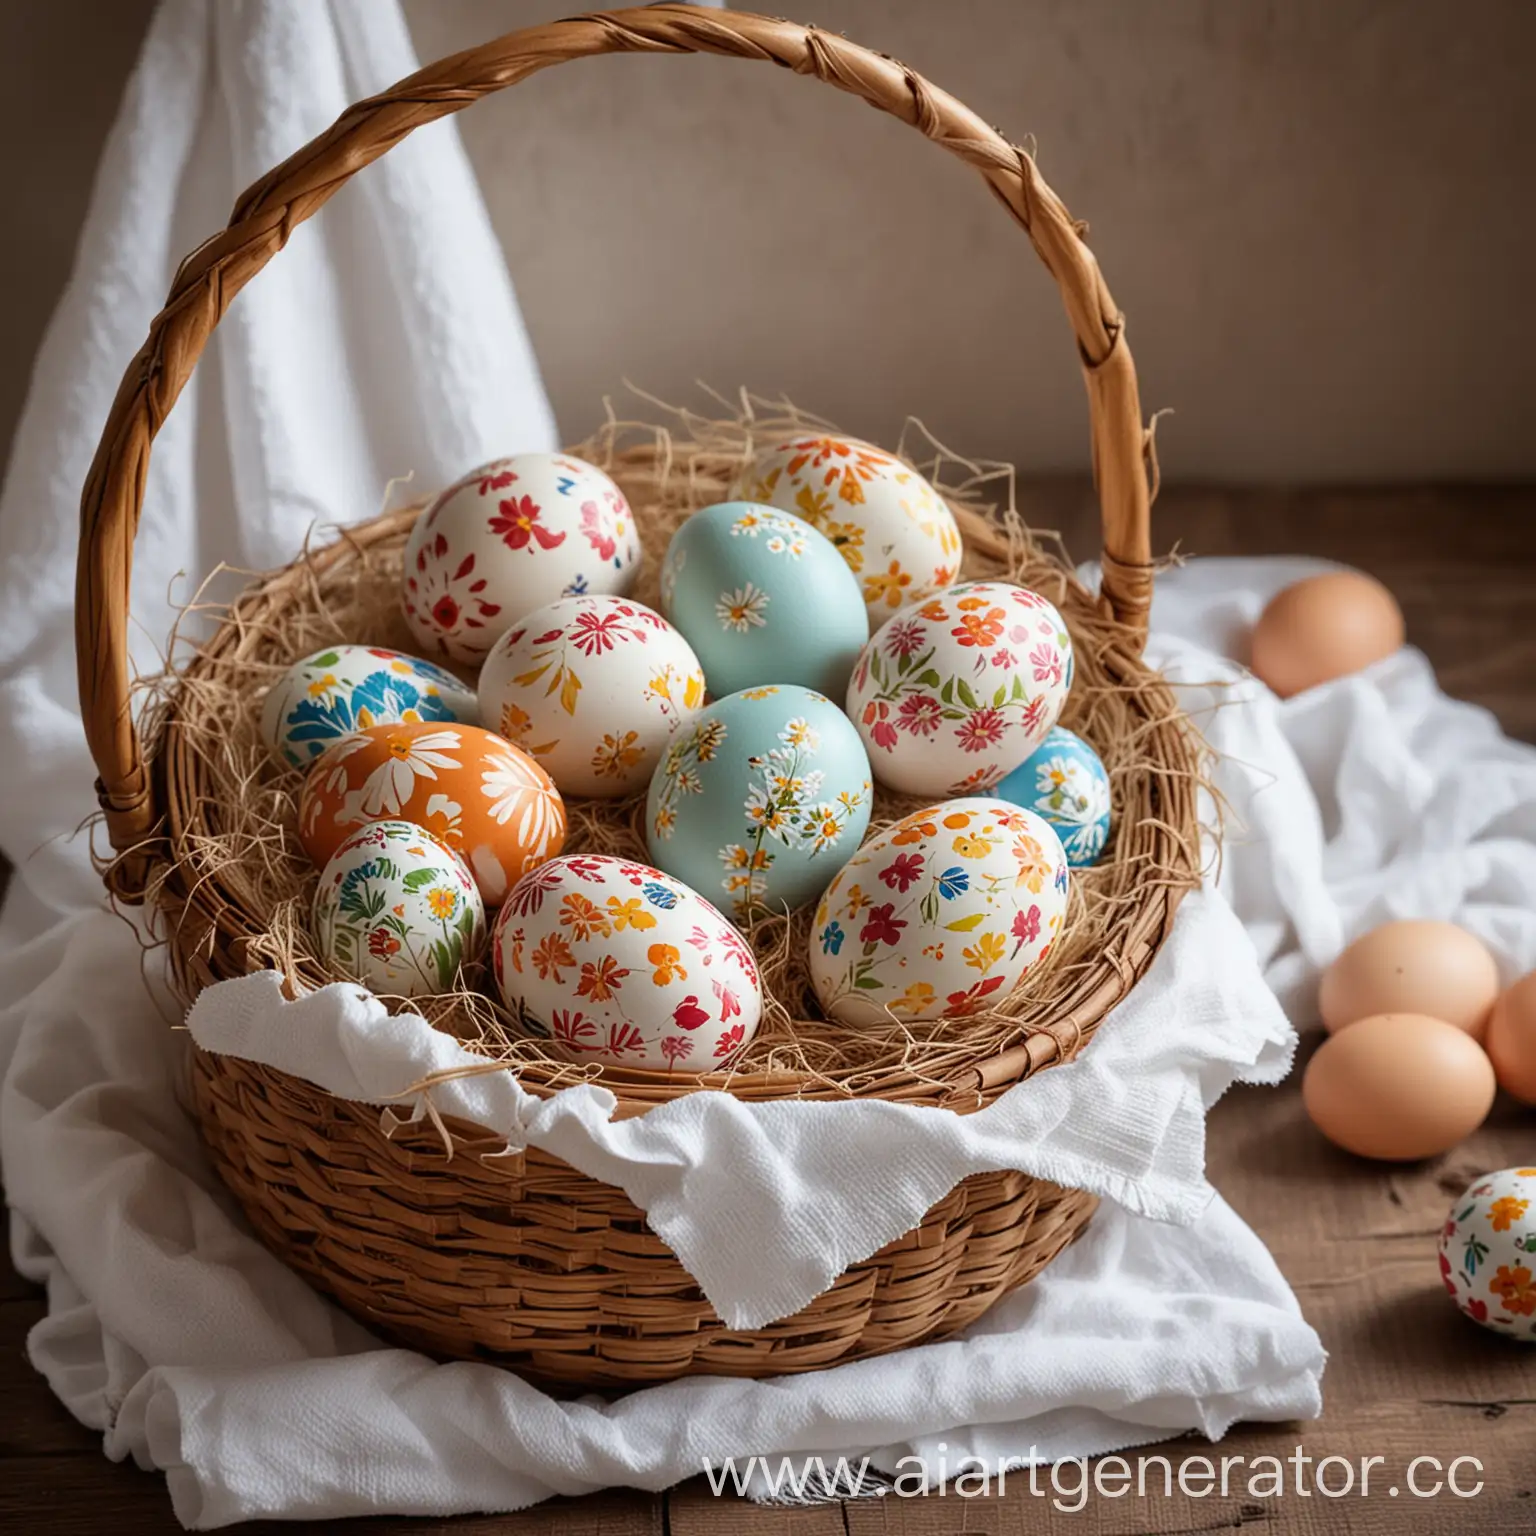 Vibrant-Easter-Celebration-Colorful-Kuliches-Painted-Eggs-and-Woven-Basket-Display